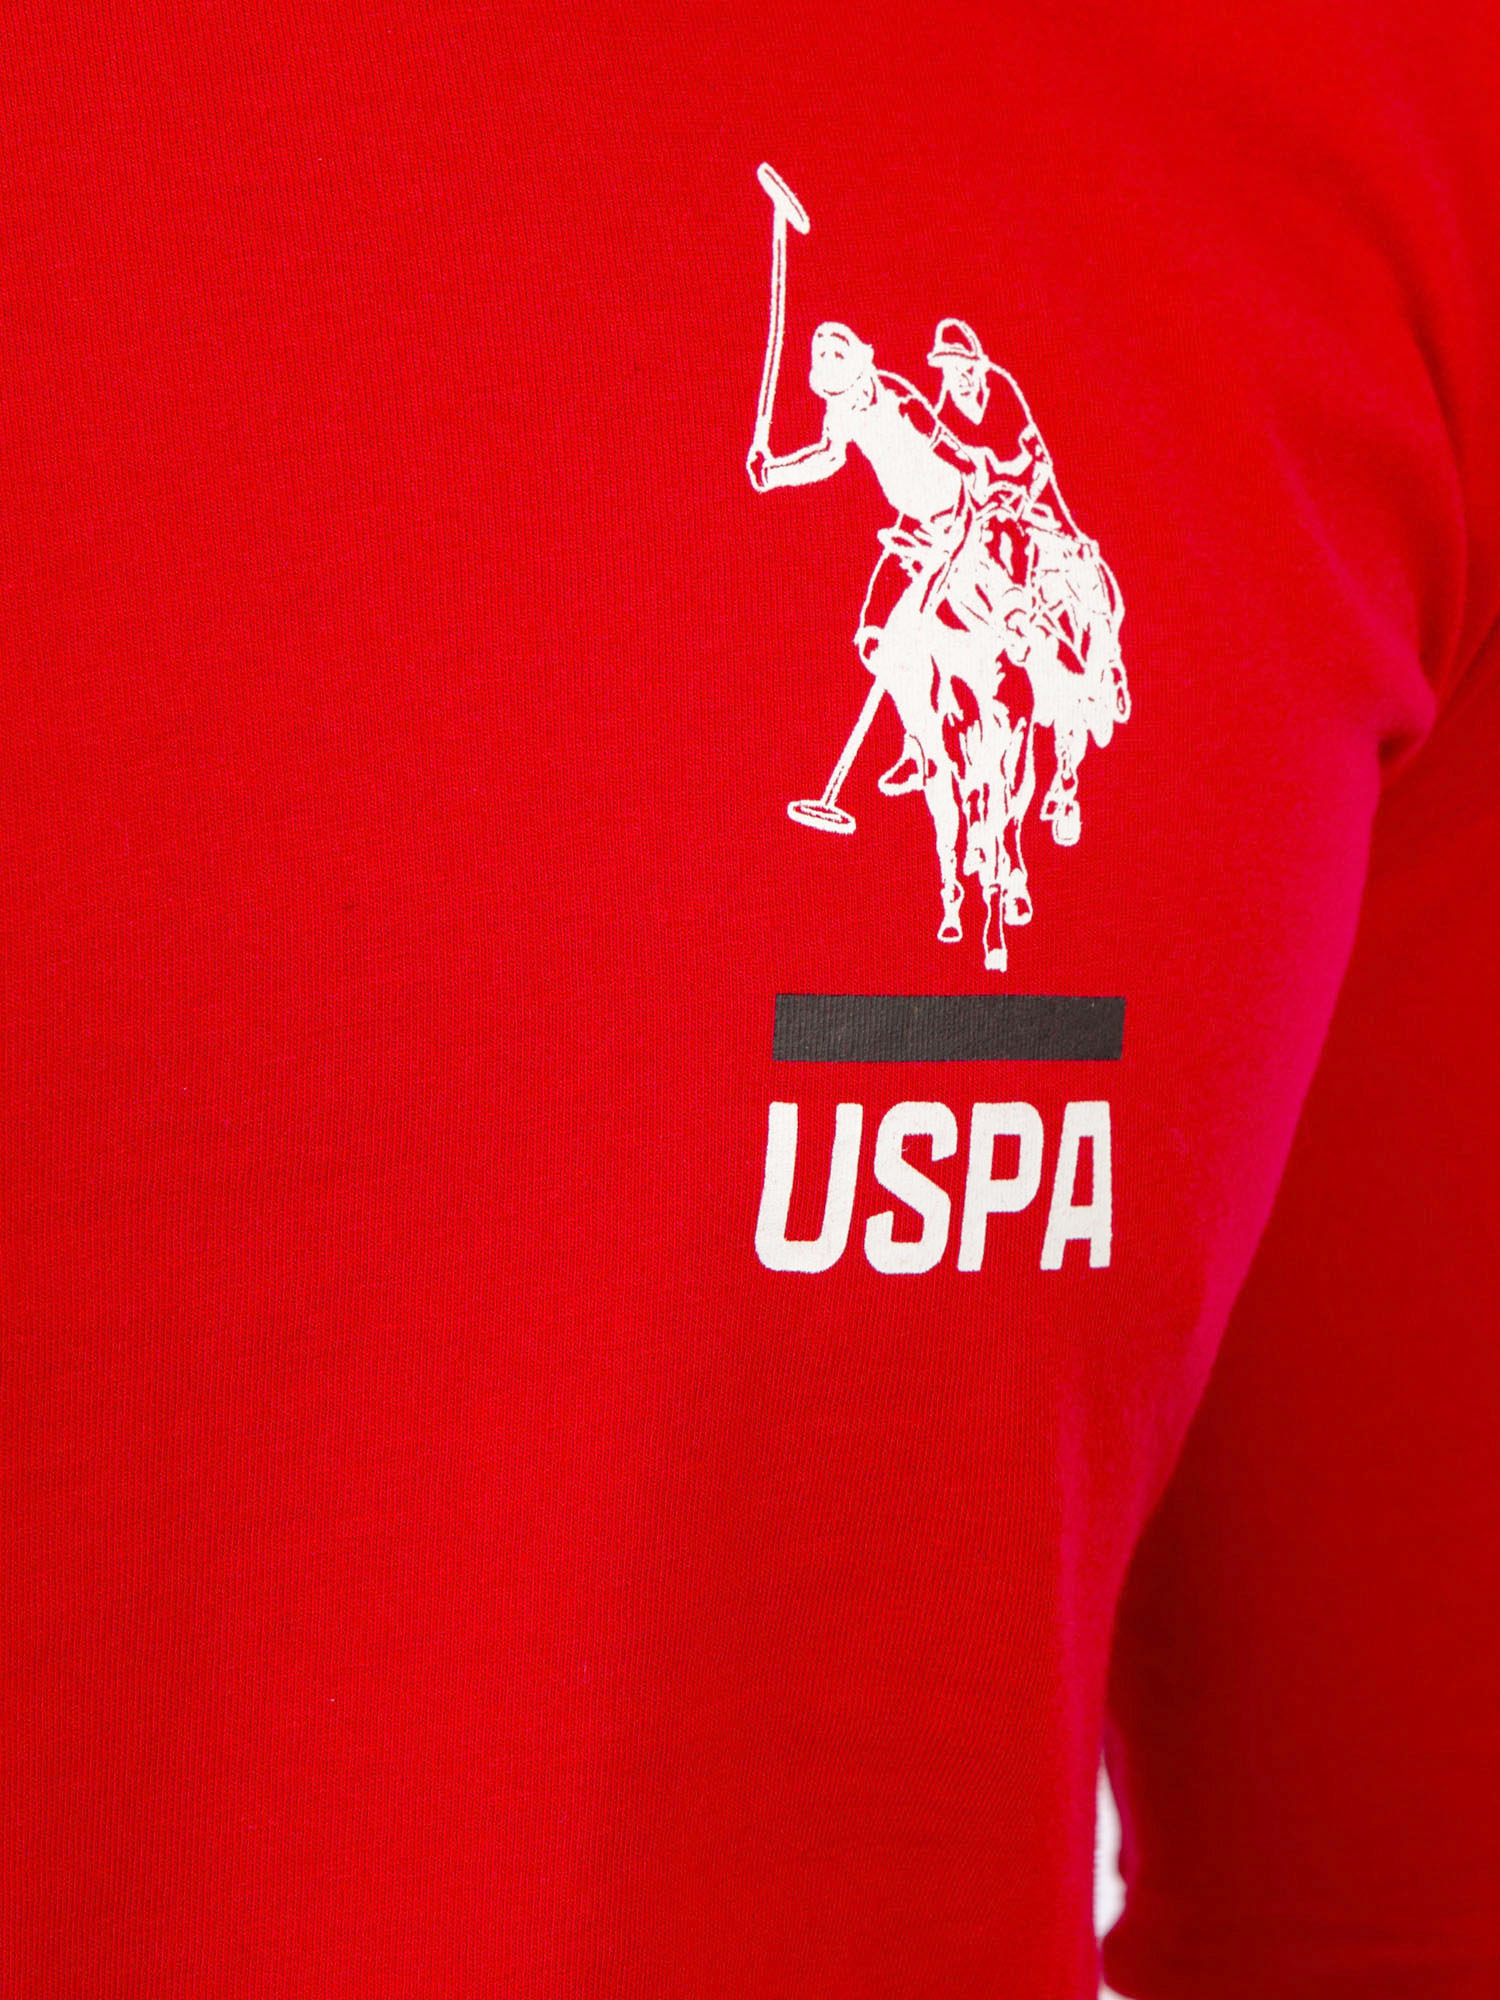 U.S. Polo Assn. Men's and Big Men's Long Sleeve Graphic T-Shirt - image 5 of 7